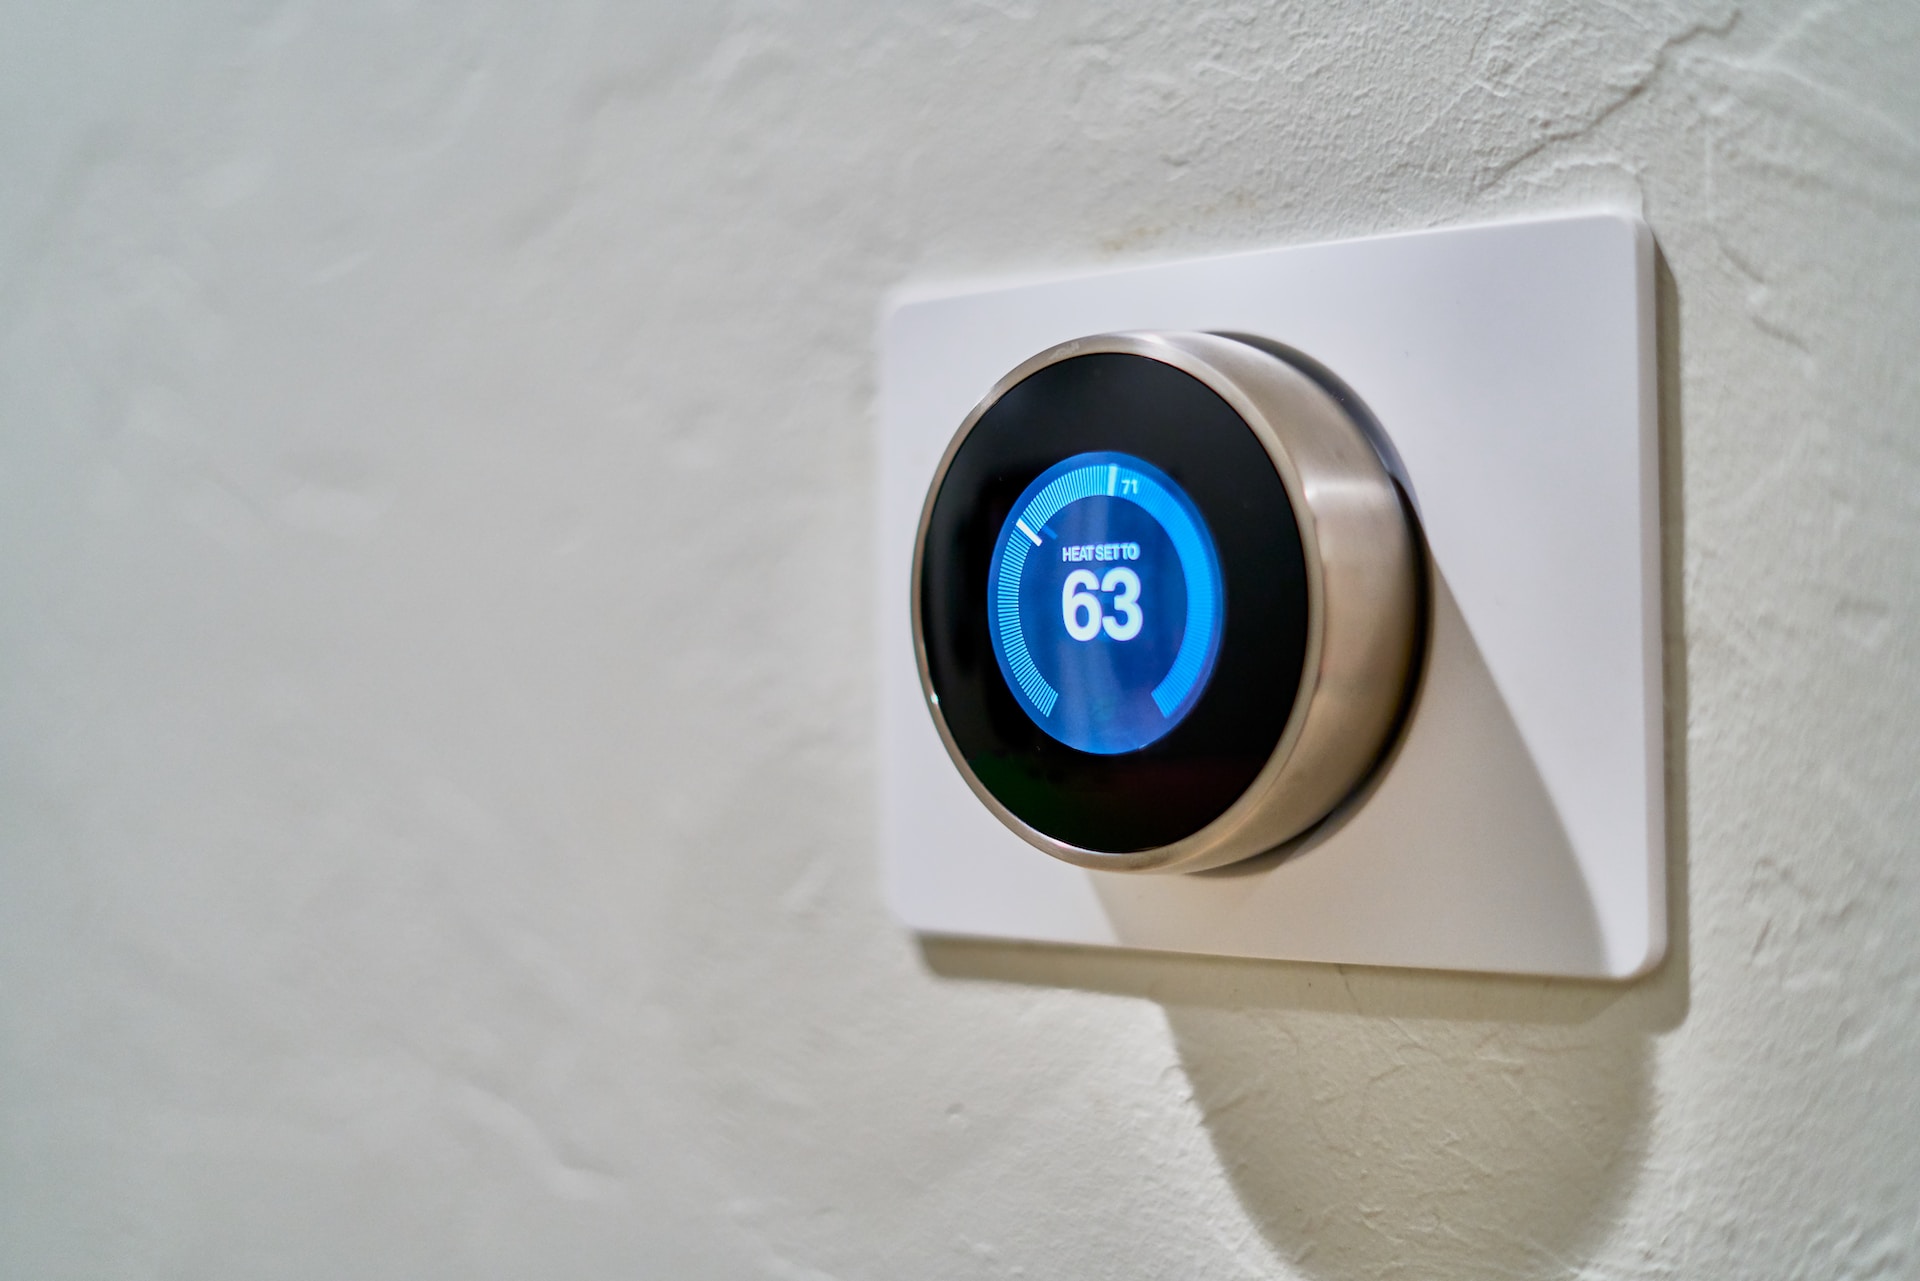 learn how to turn off eco mode on nest